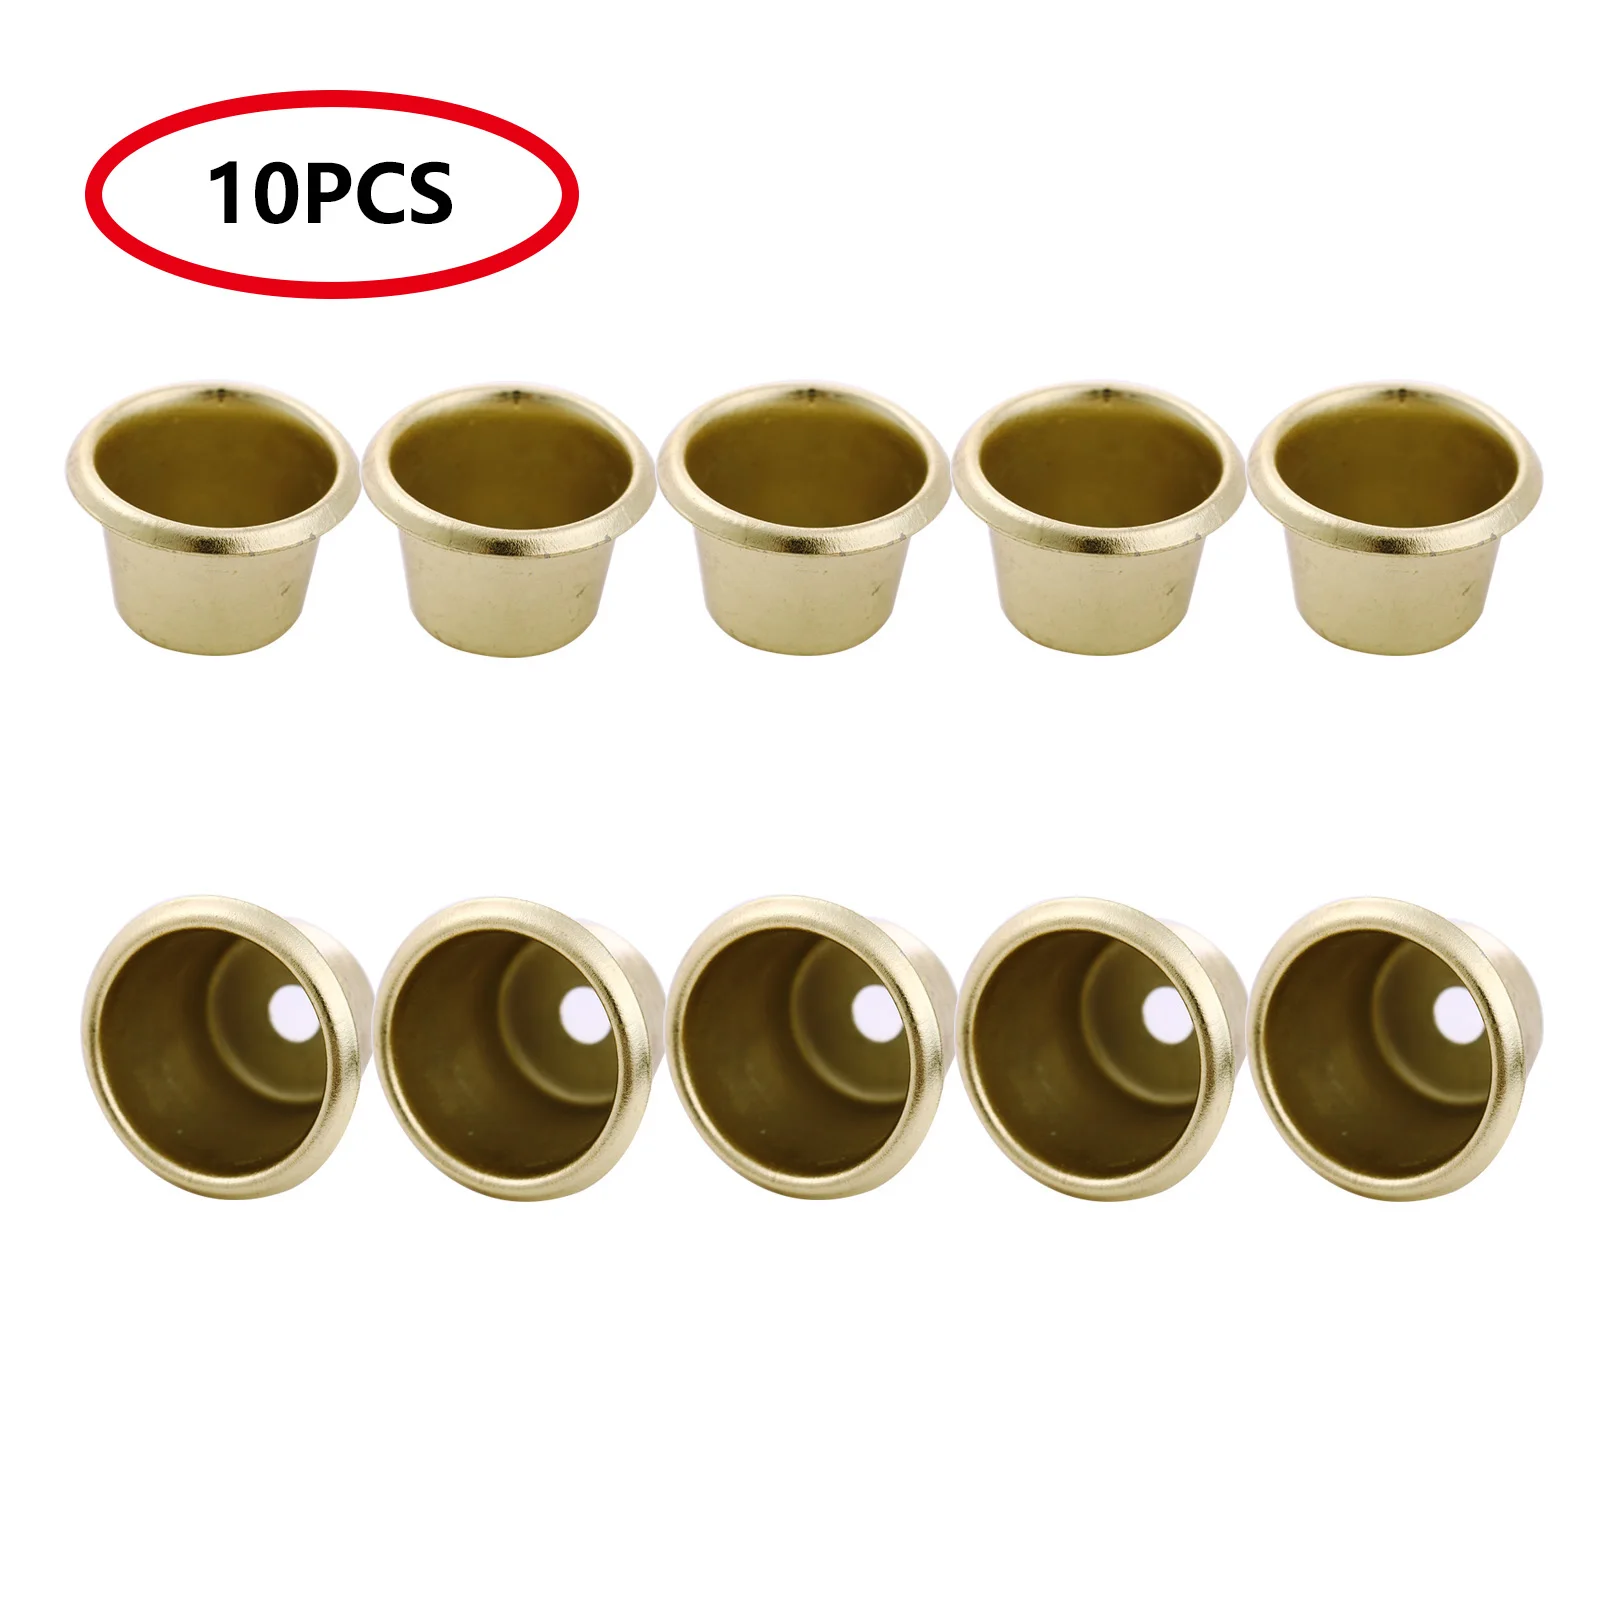 10Pc Small Metal Candle Cups Standard Tapered Wax Candles Votive Pegs Containers DIY Lamp Candle Making Fittings Home Decoration